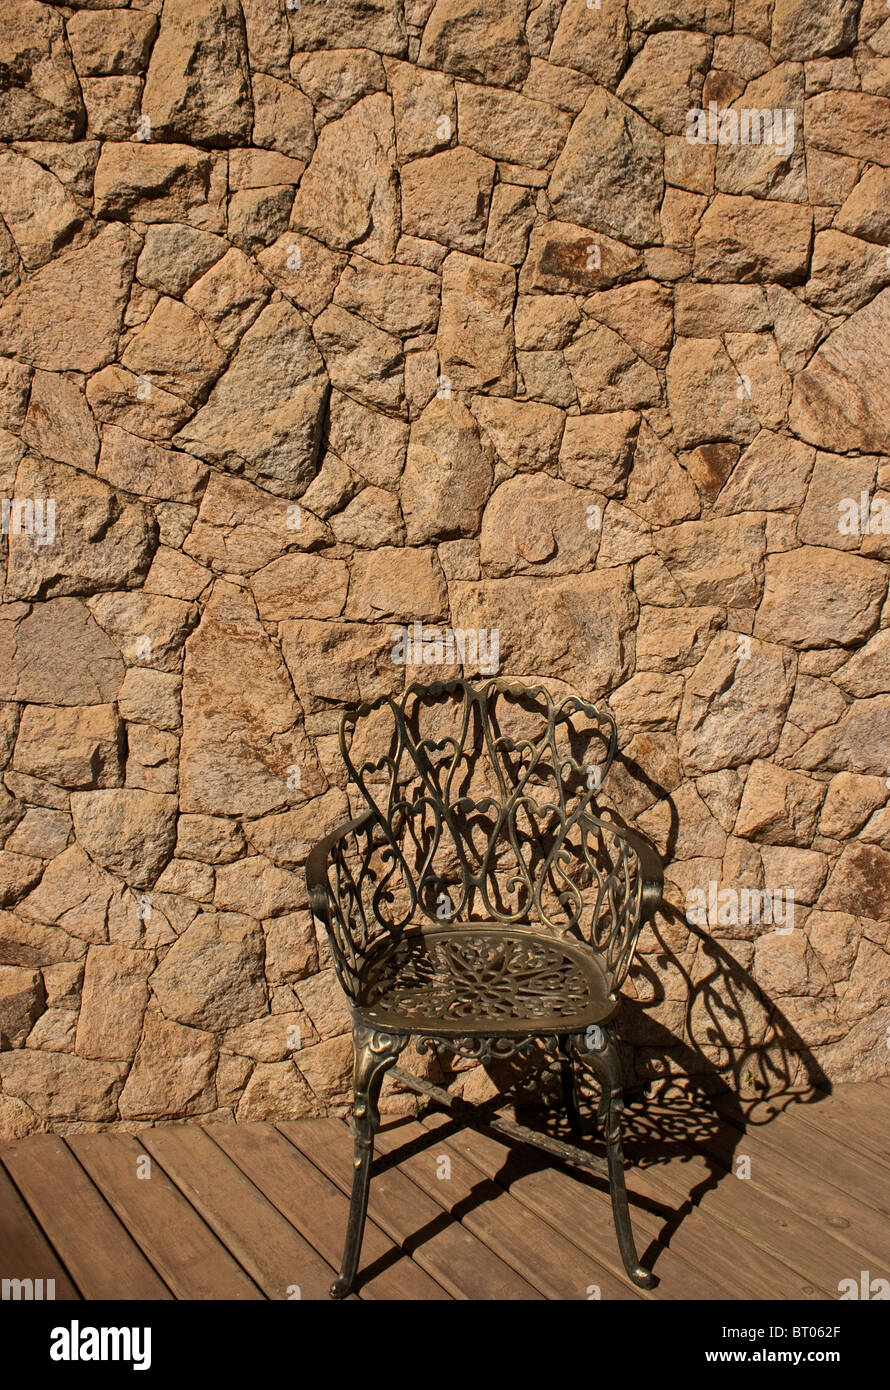 Rock wall and wooden deck with an empty chair Stock Photo